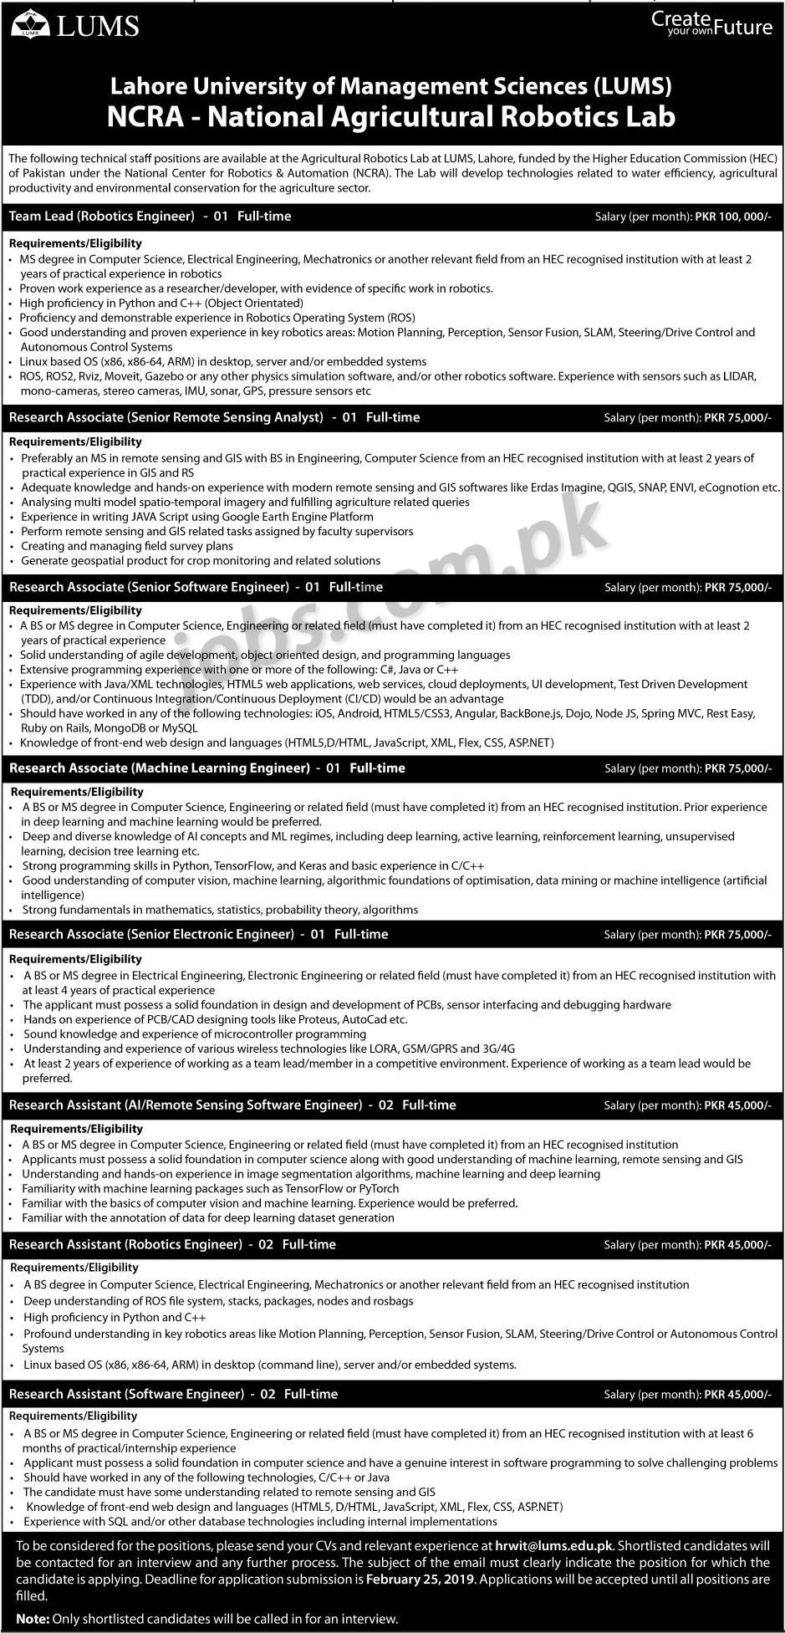 LUMS Jobs 2019 for 11+ Research Associates, Assistants & Team Lead Posts